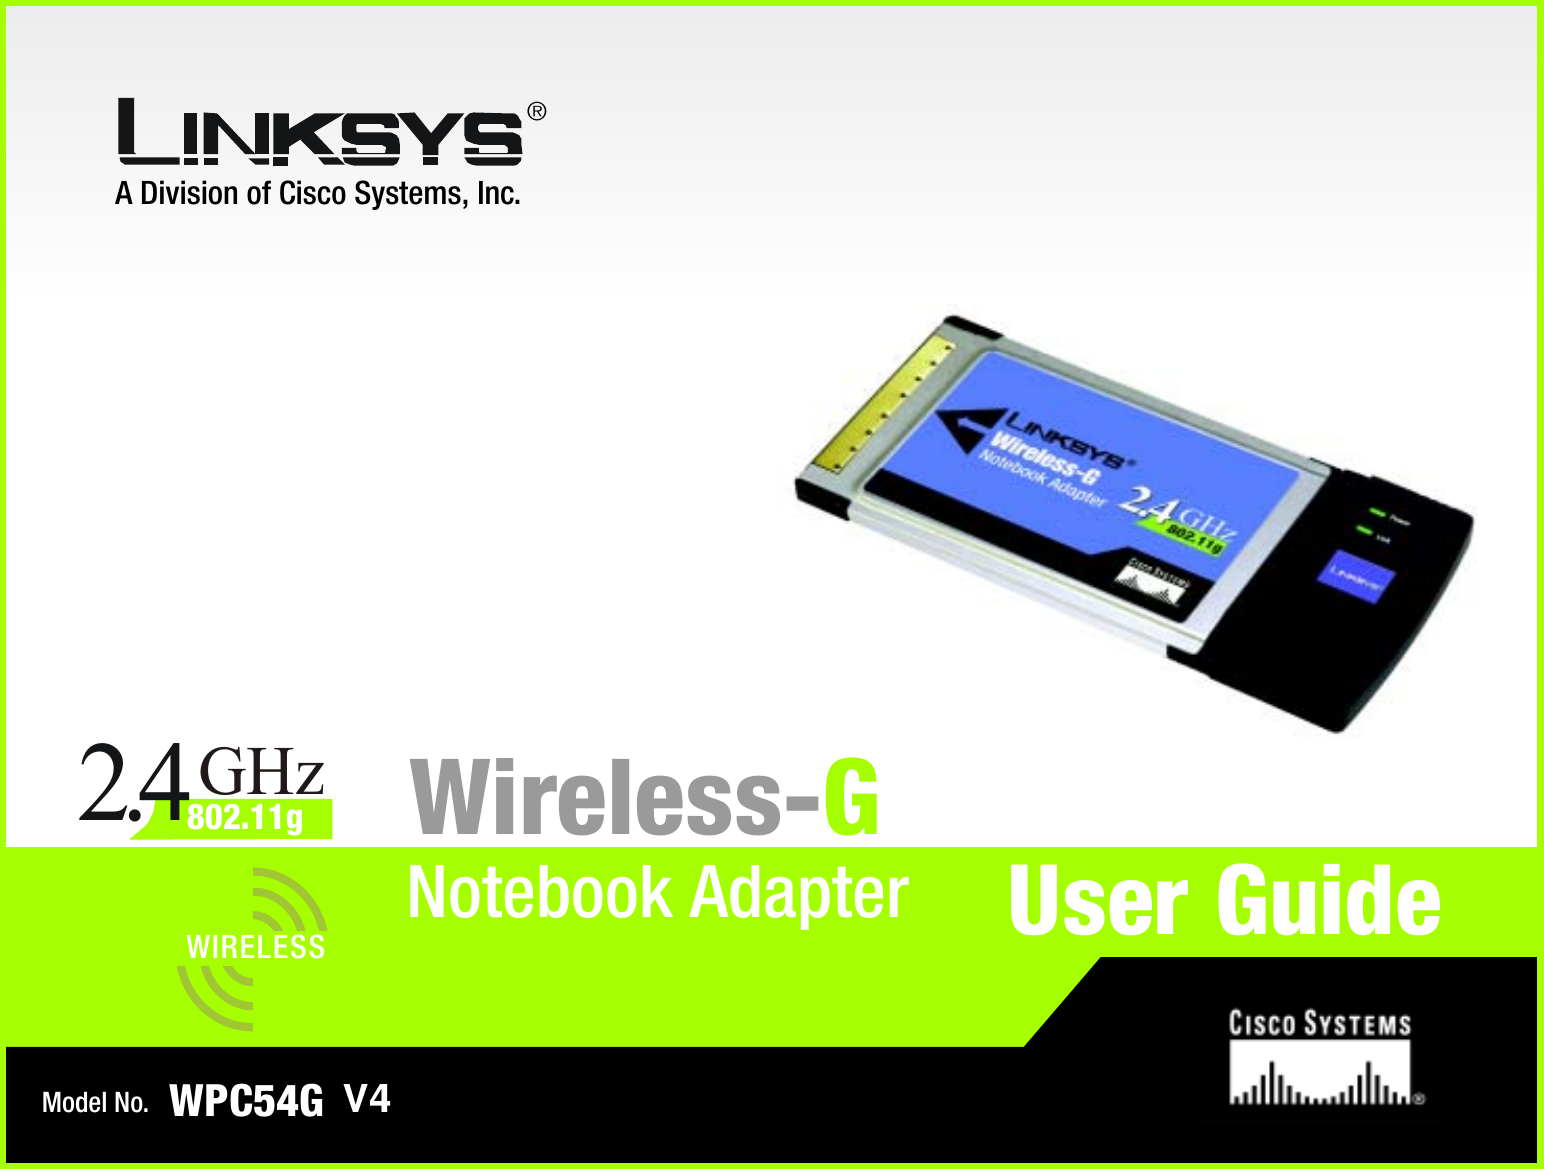 A Division of Cisco Systems, Inc.®Model No.Notebook AdapterWireless-GWPC54GUser GuideWIRELESSGHz2.4802.11gV4